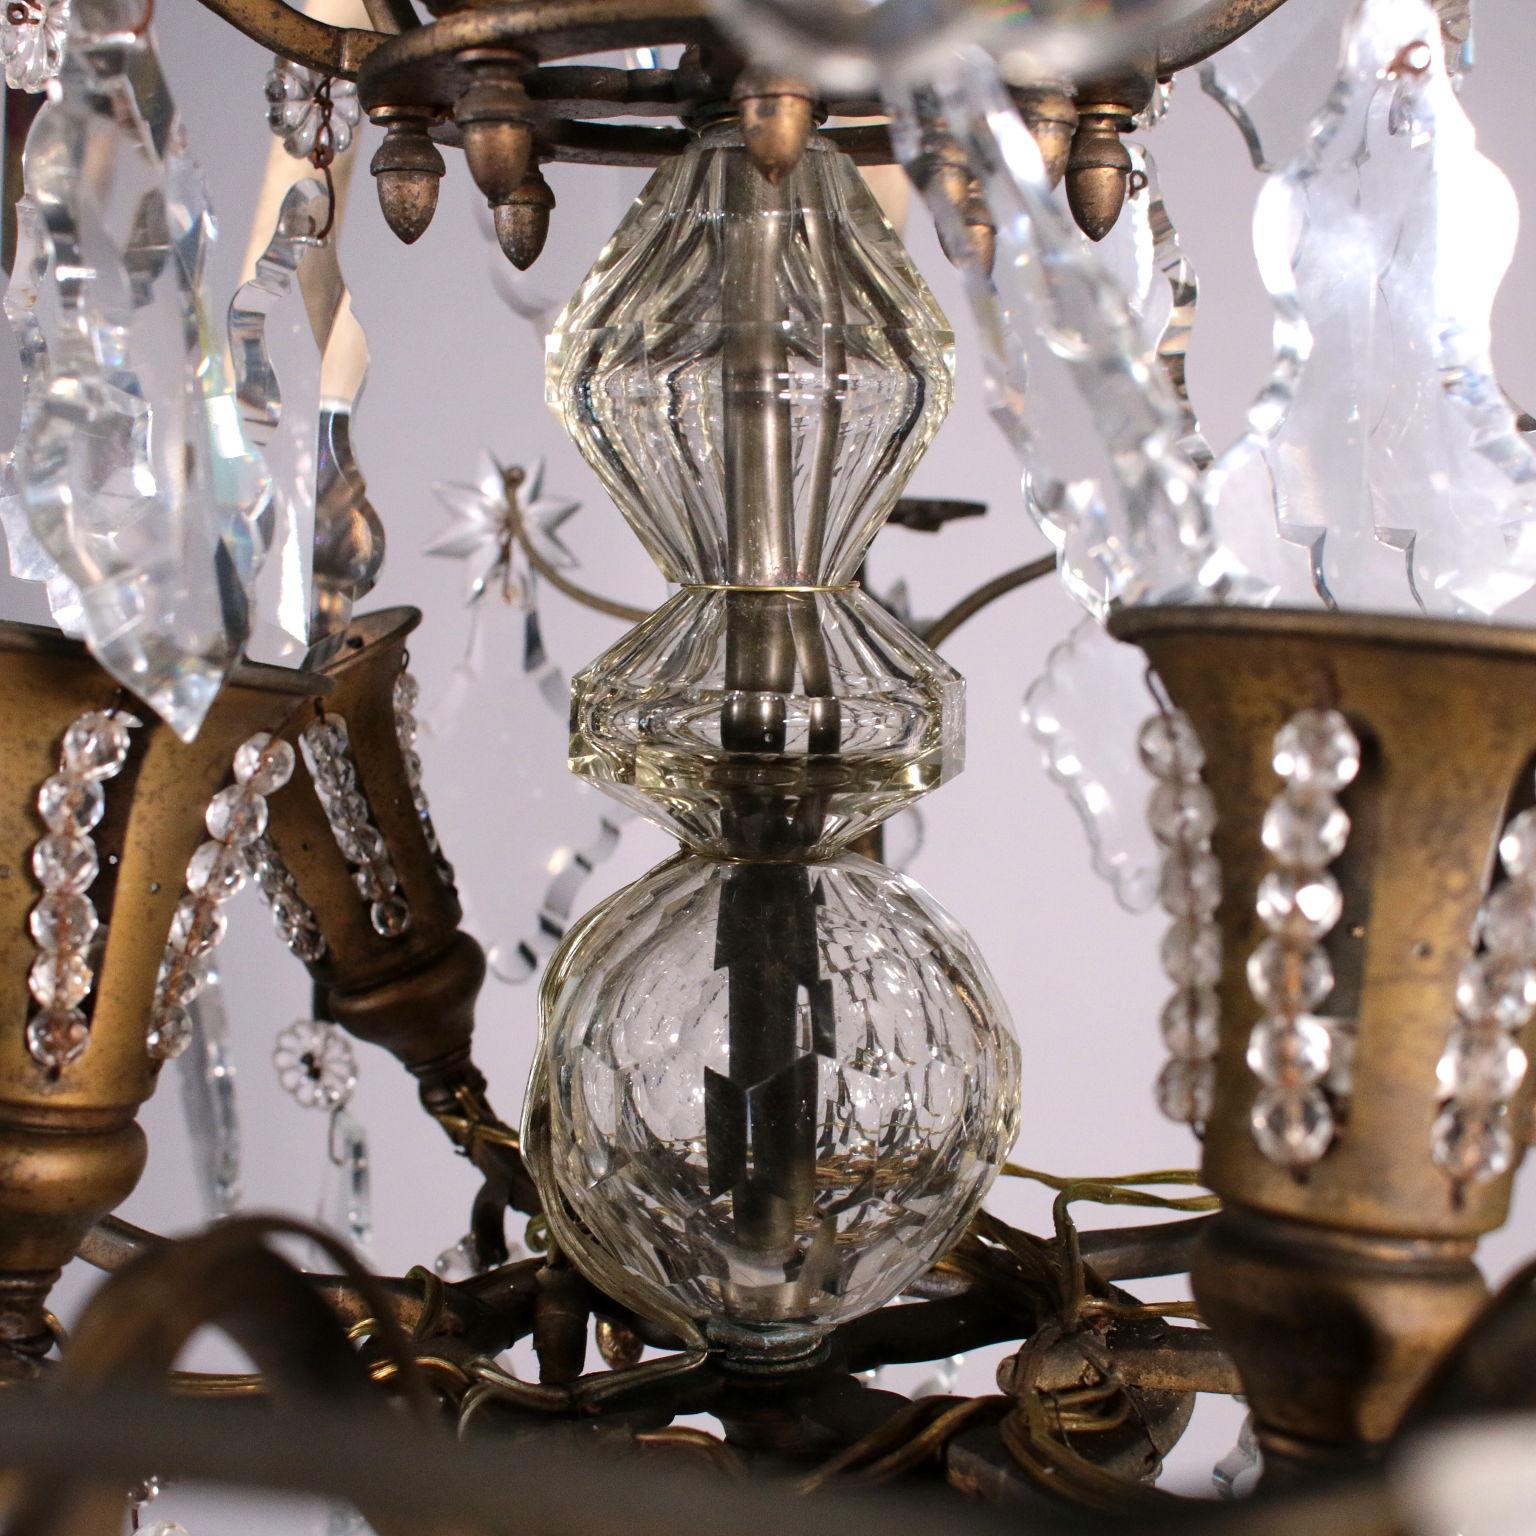 12-Light Spots Chandelier Bronze and Glass, Italy, 19th Century For Sale 2